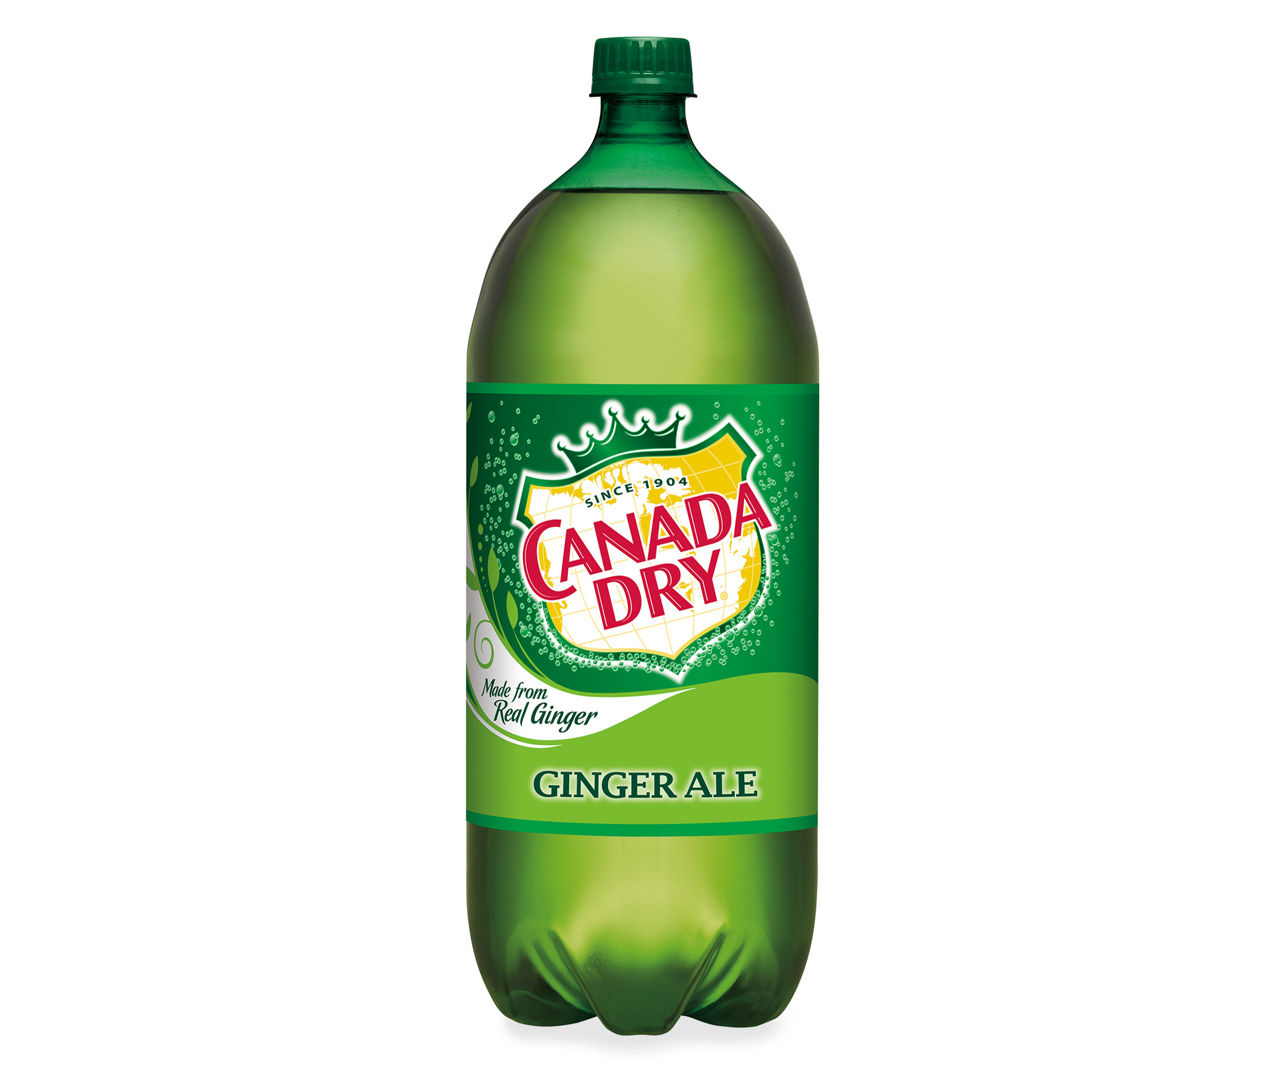 Canada Dry Canada Dry Ginger Ale, 2 L Bottle